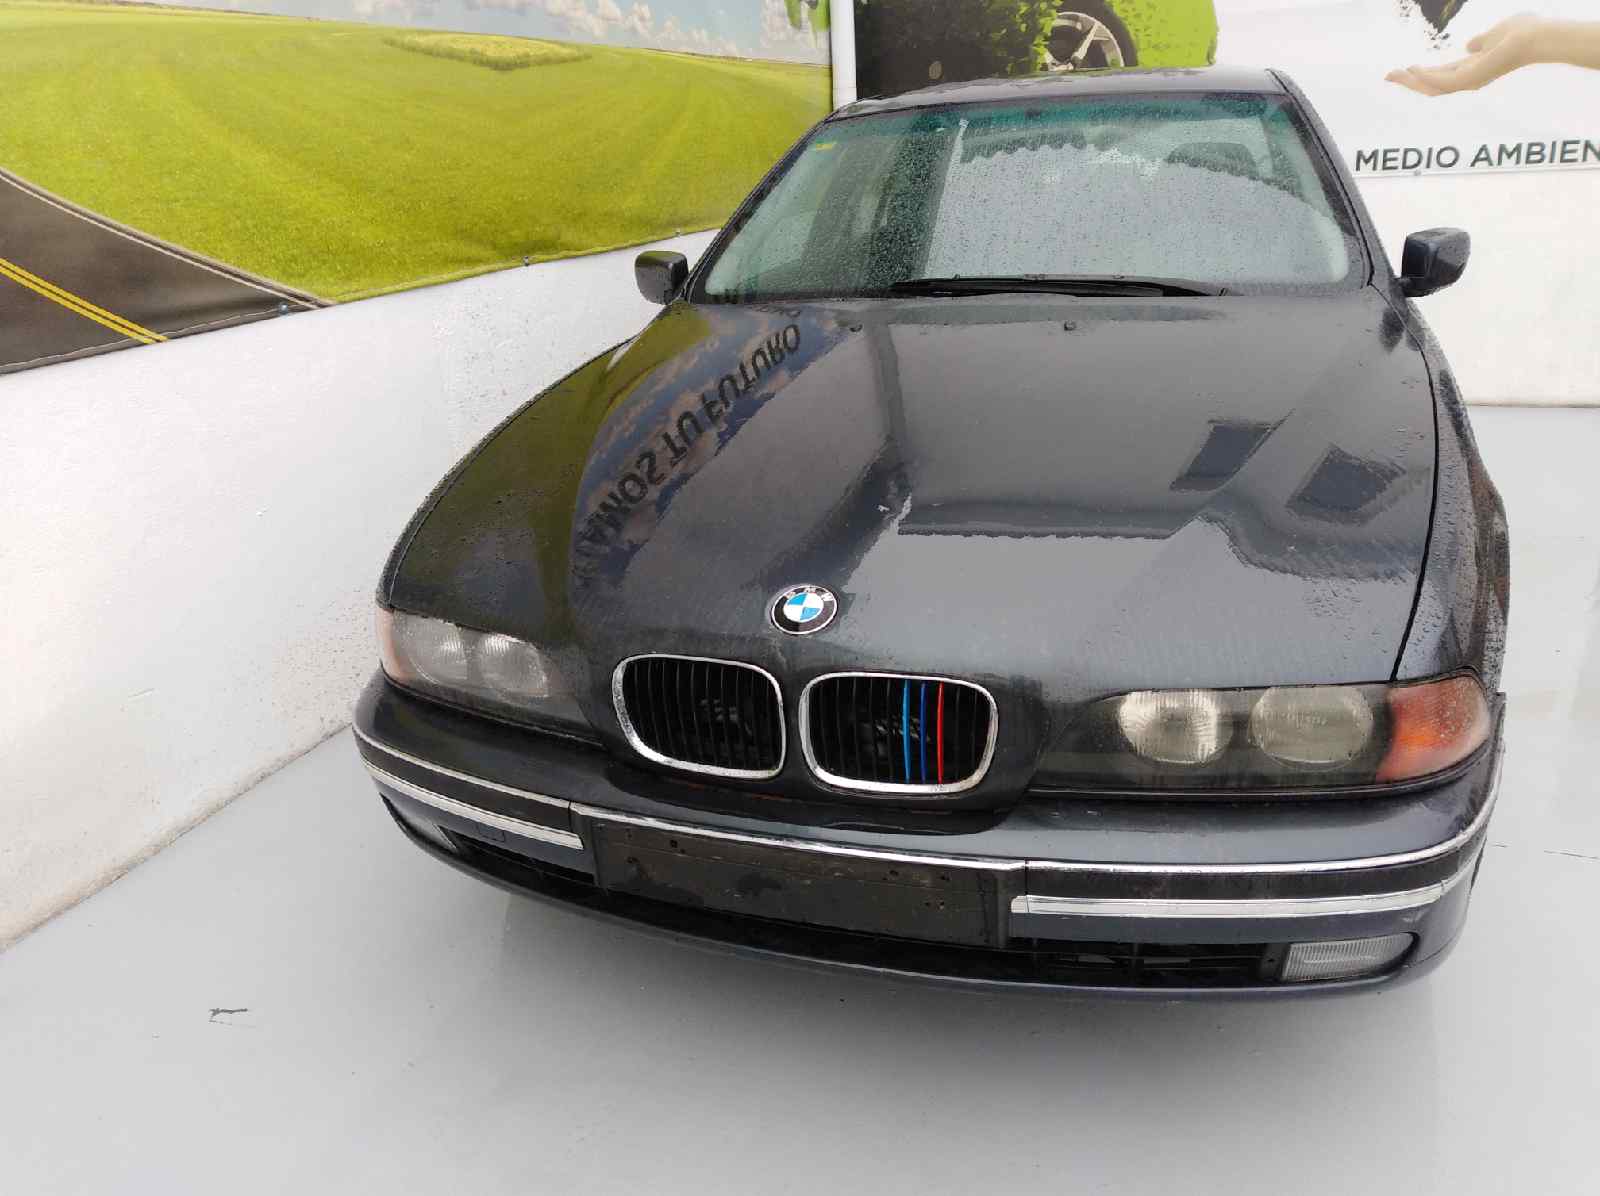 BMW 5 Series E39 (1995-2004) Other part 1056000095, 1056000095, 1056000095 19282171